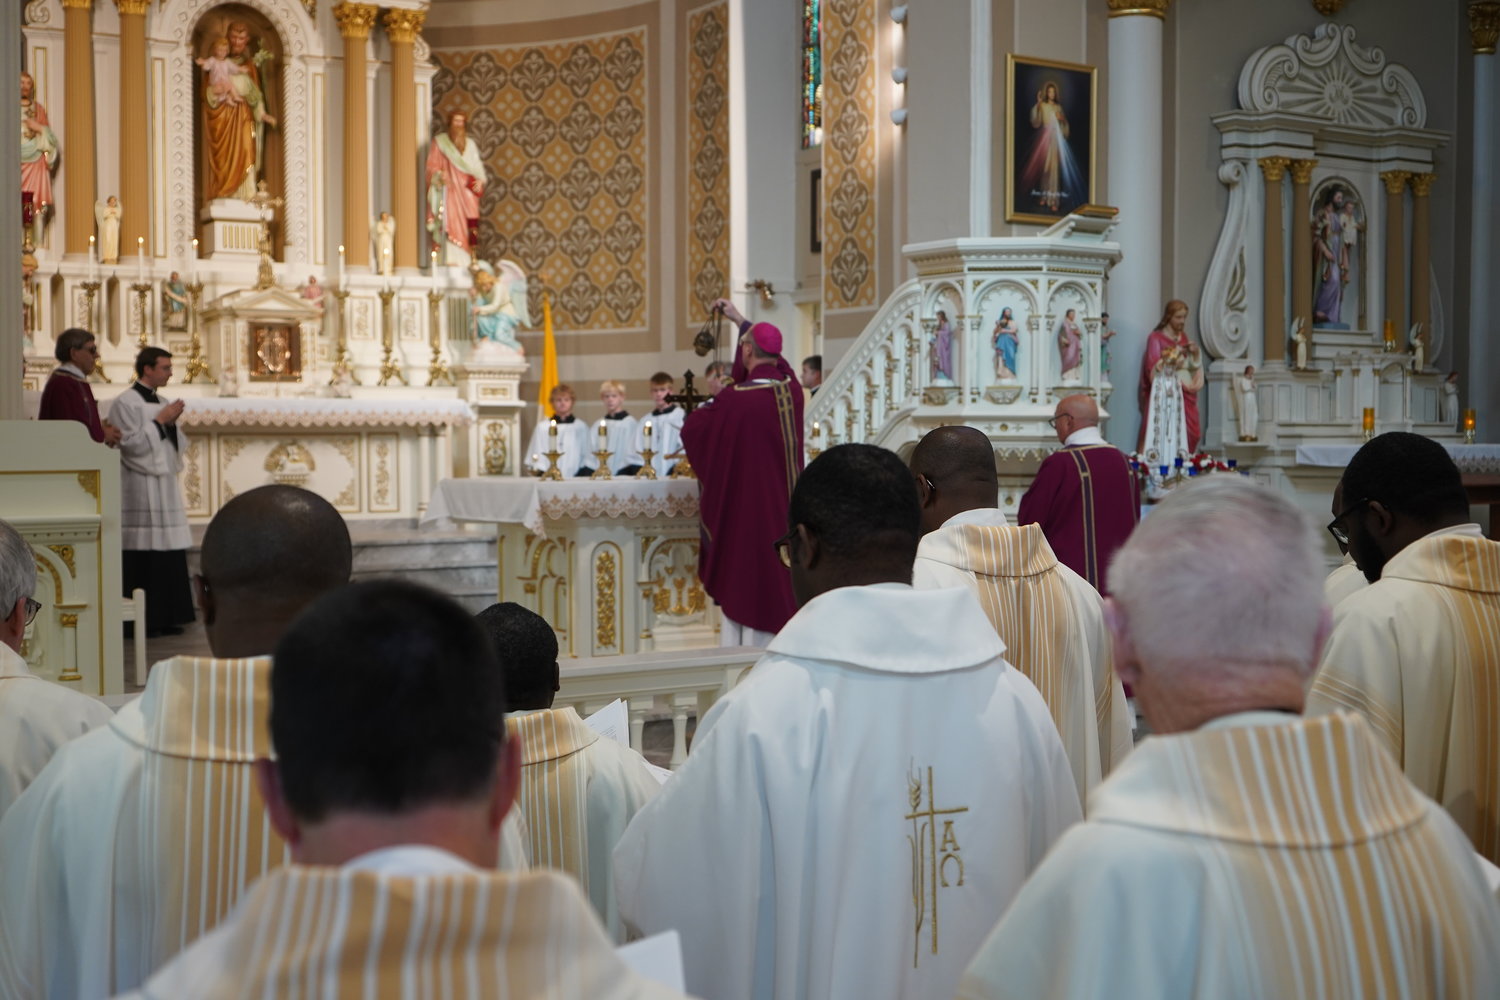 Bishop W. Shawn McKnight and priests of the Jefferson City diocese offer Mass for the repose of deceased priests of the diocese on Nov. 5 in St. Joseph Church in Westphalia.